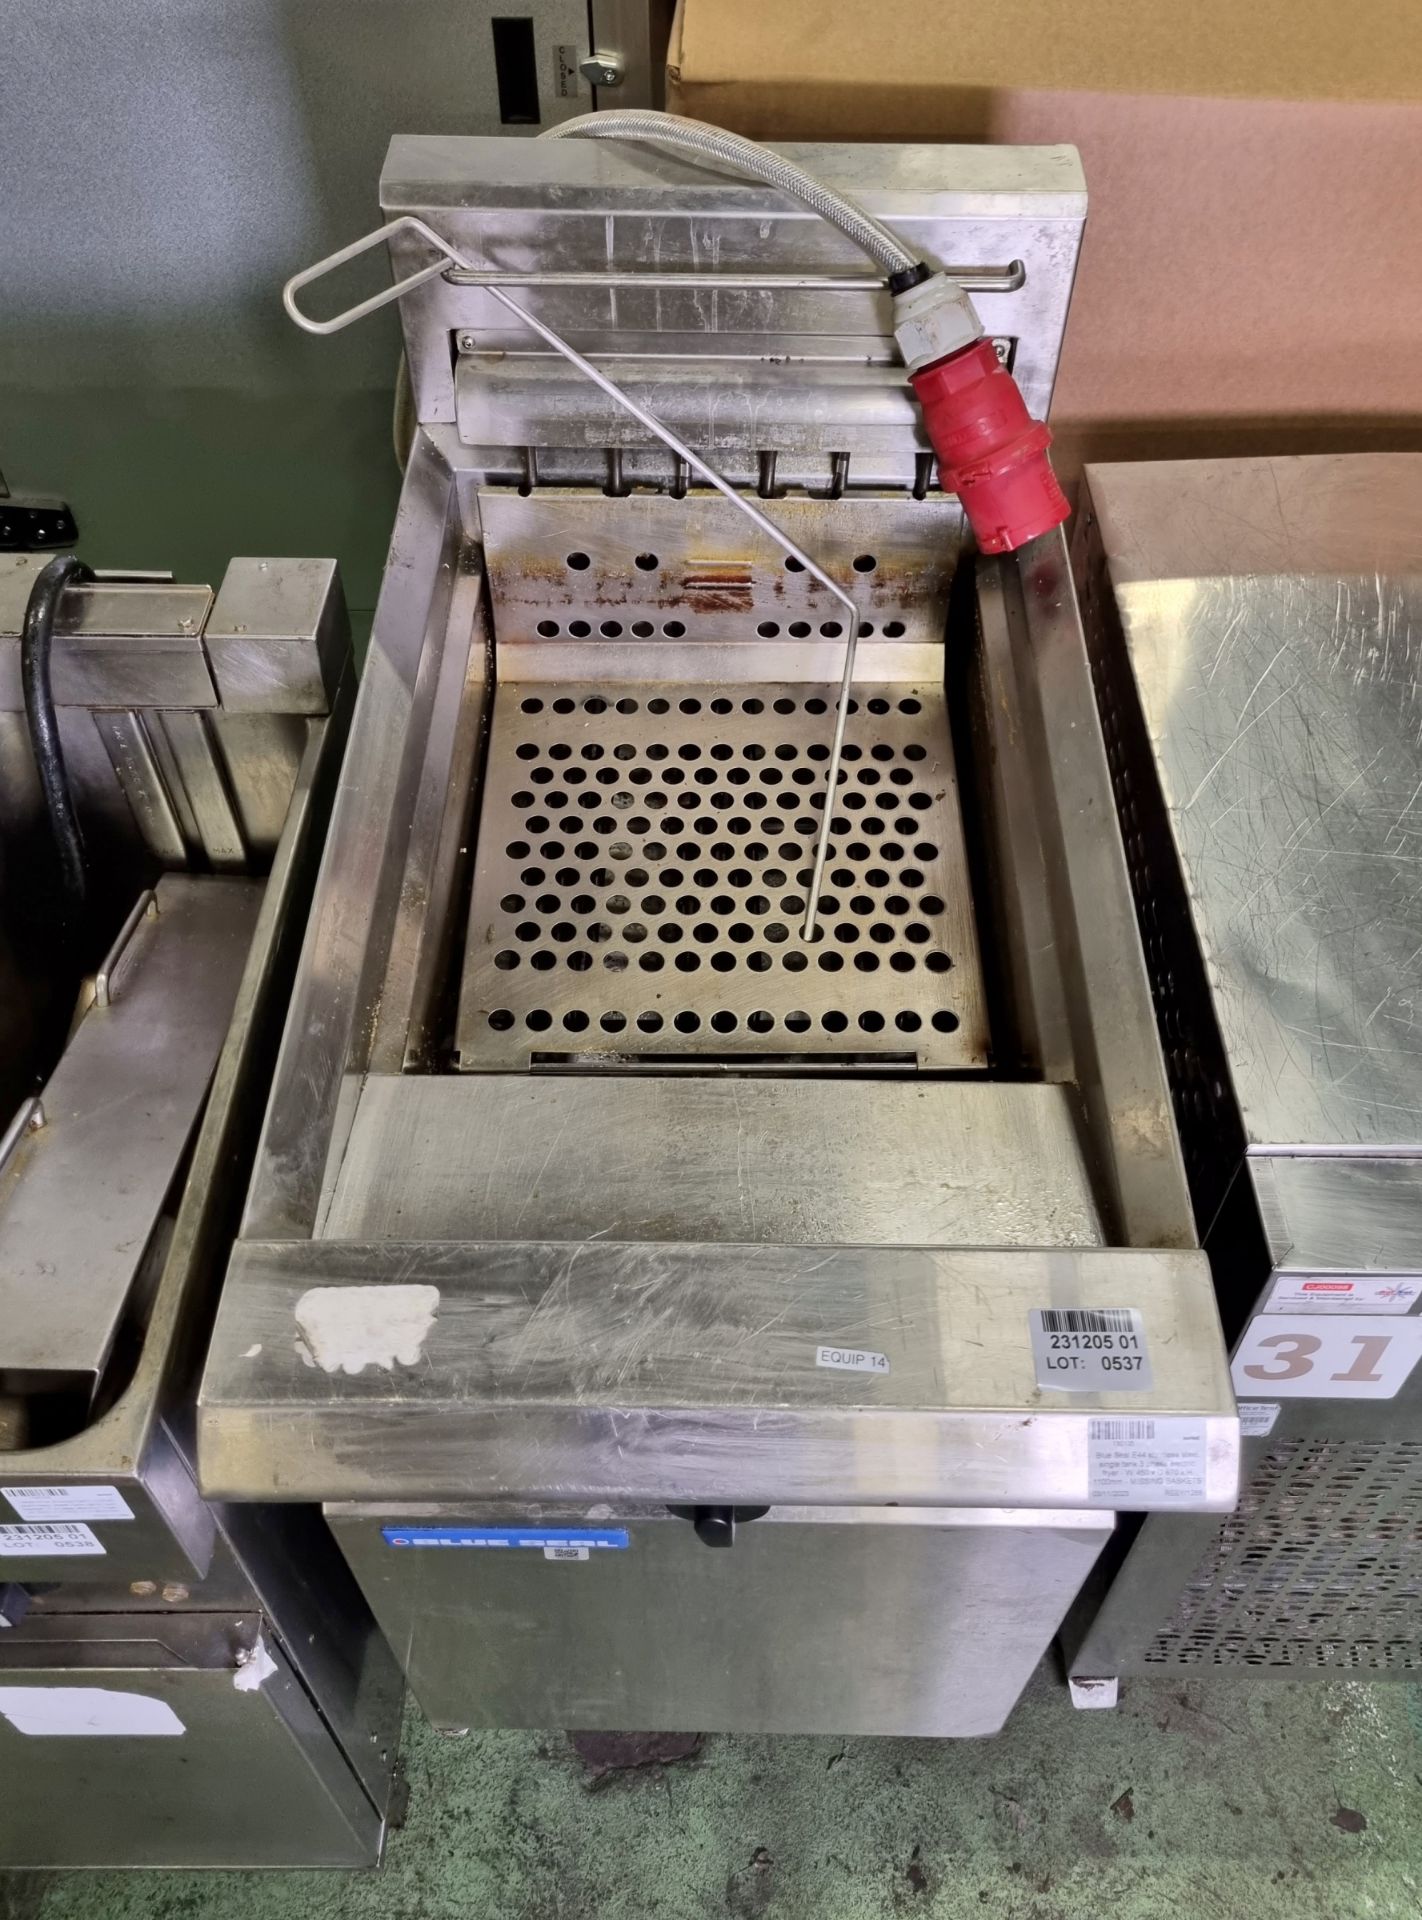 Blue Seal E44 stainless steel single tank 3 phase electric fryer - W 450 x D 870 x H 1100mm - Image 2 of 4